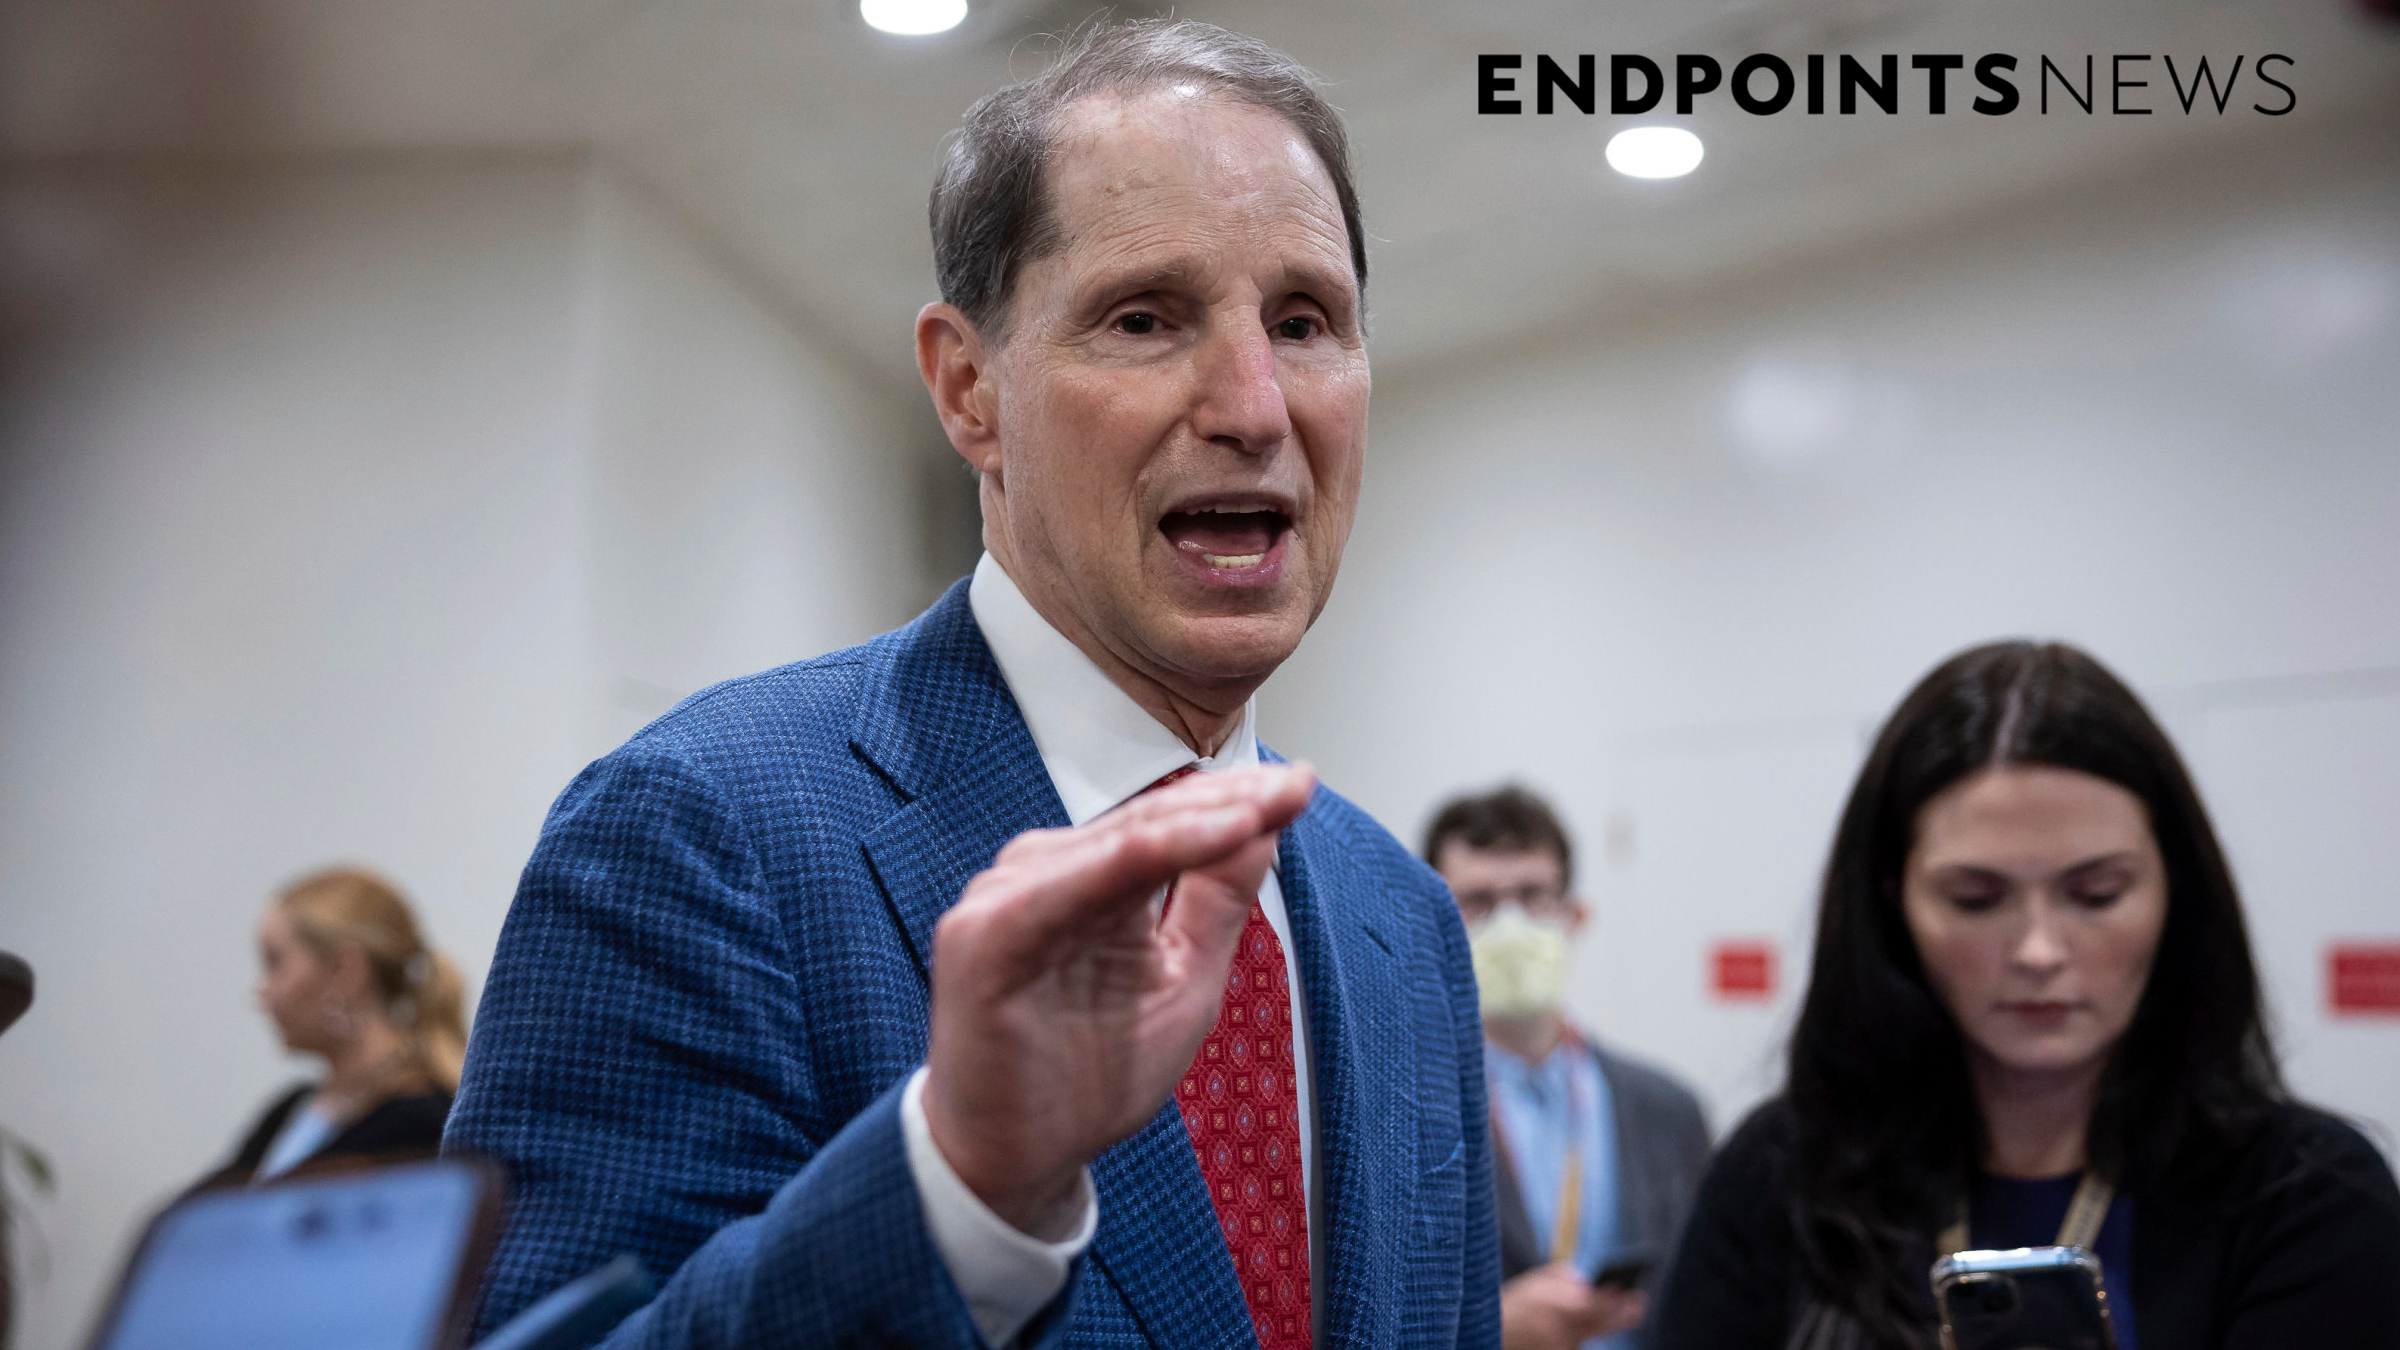 Inflation rebates incoming: Wyden calls on CMS to move quickly as Novartis CEO pledges reversal